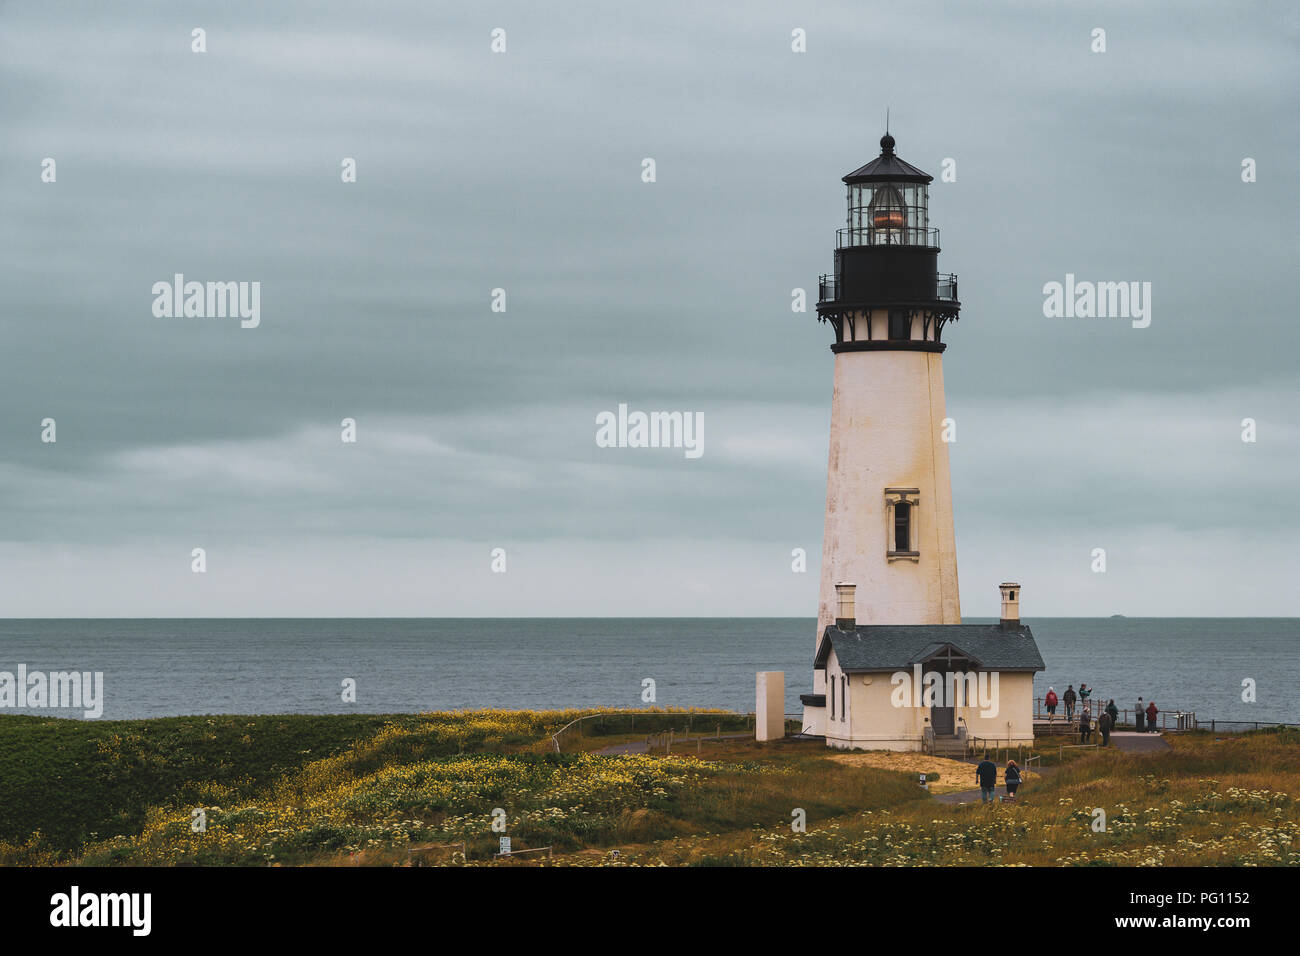 The lighthouse of the Yaquina Head Outstanding Natural Area in Lincoln County, Newport, Oregon Coast, USA. Stock Photo